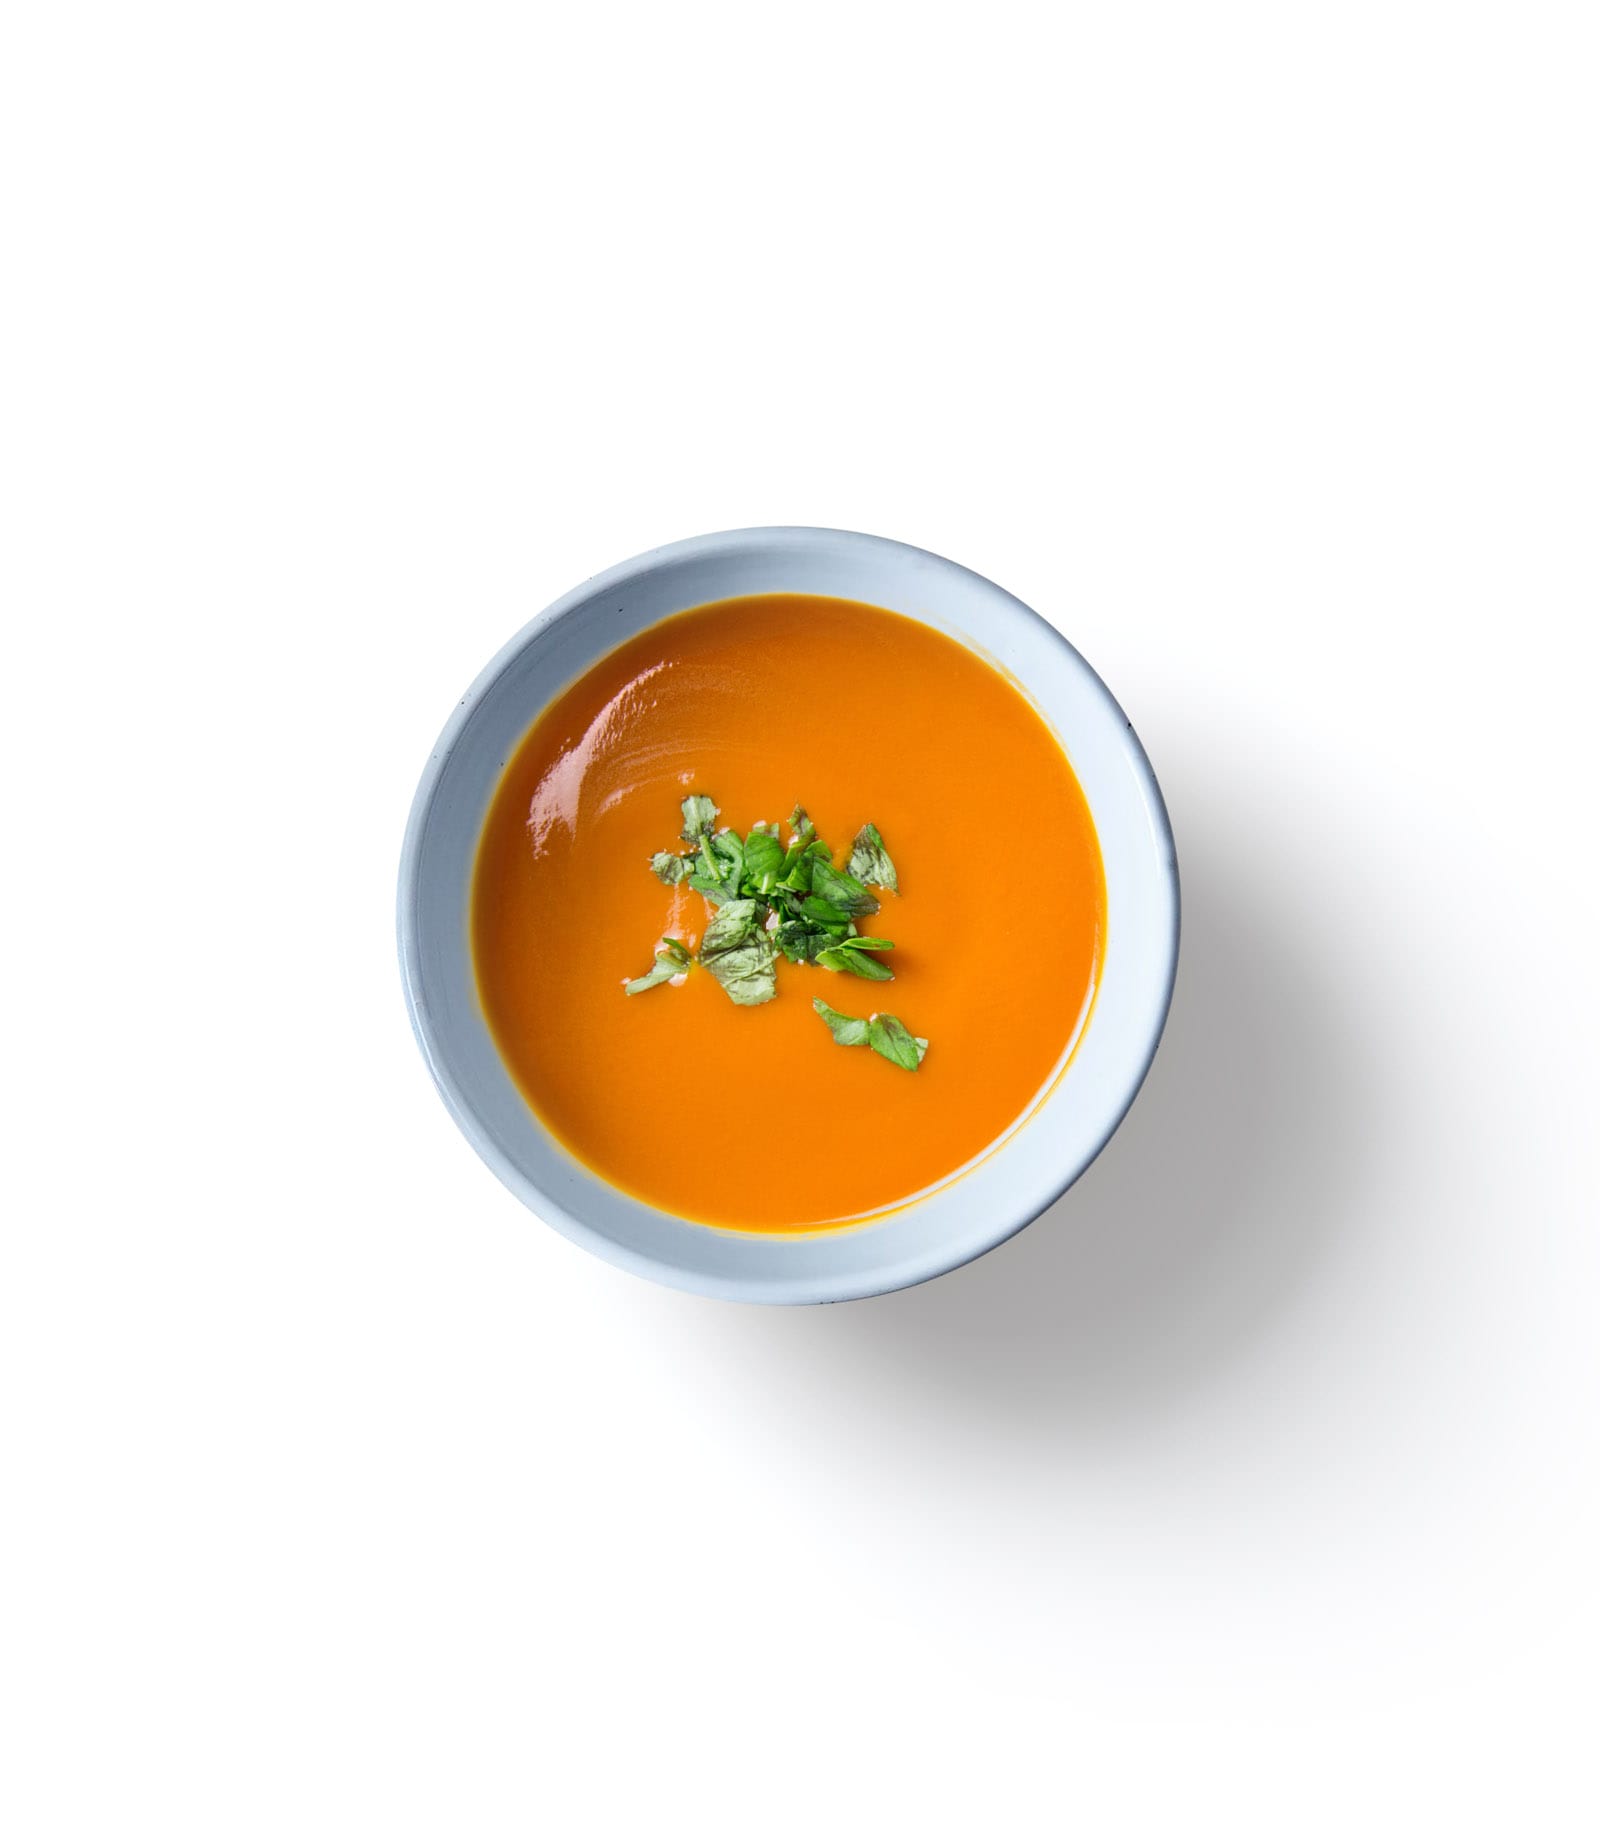 Spiced Parsnip Soup Mockup Top View | Mockup store | Creatoom